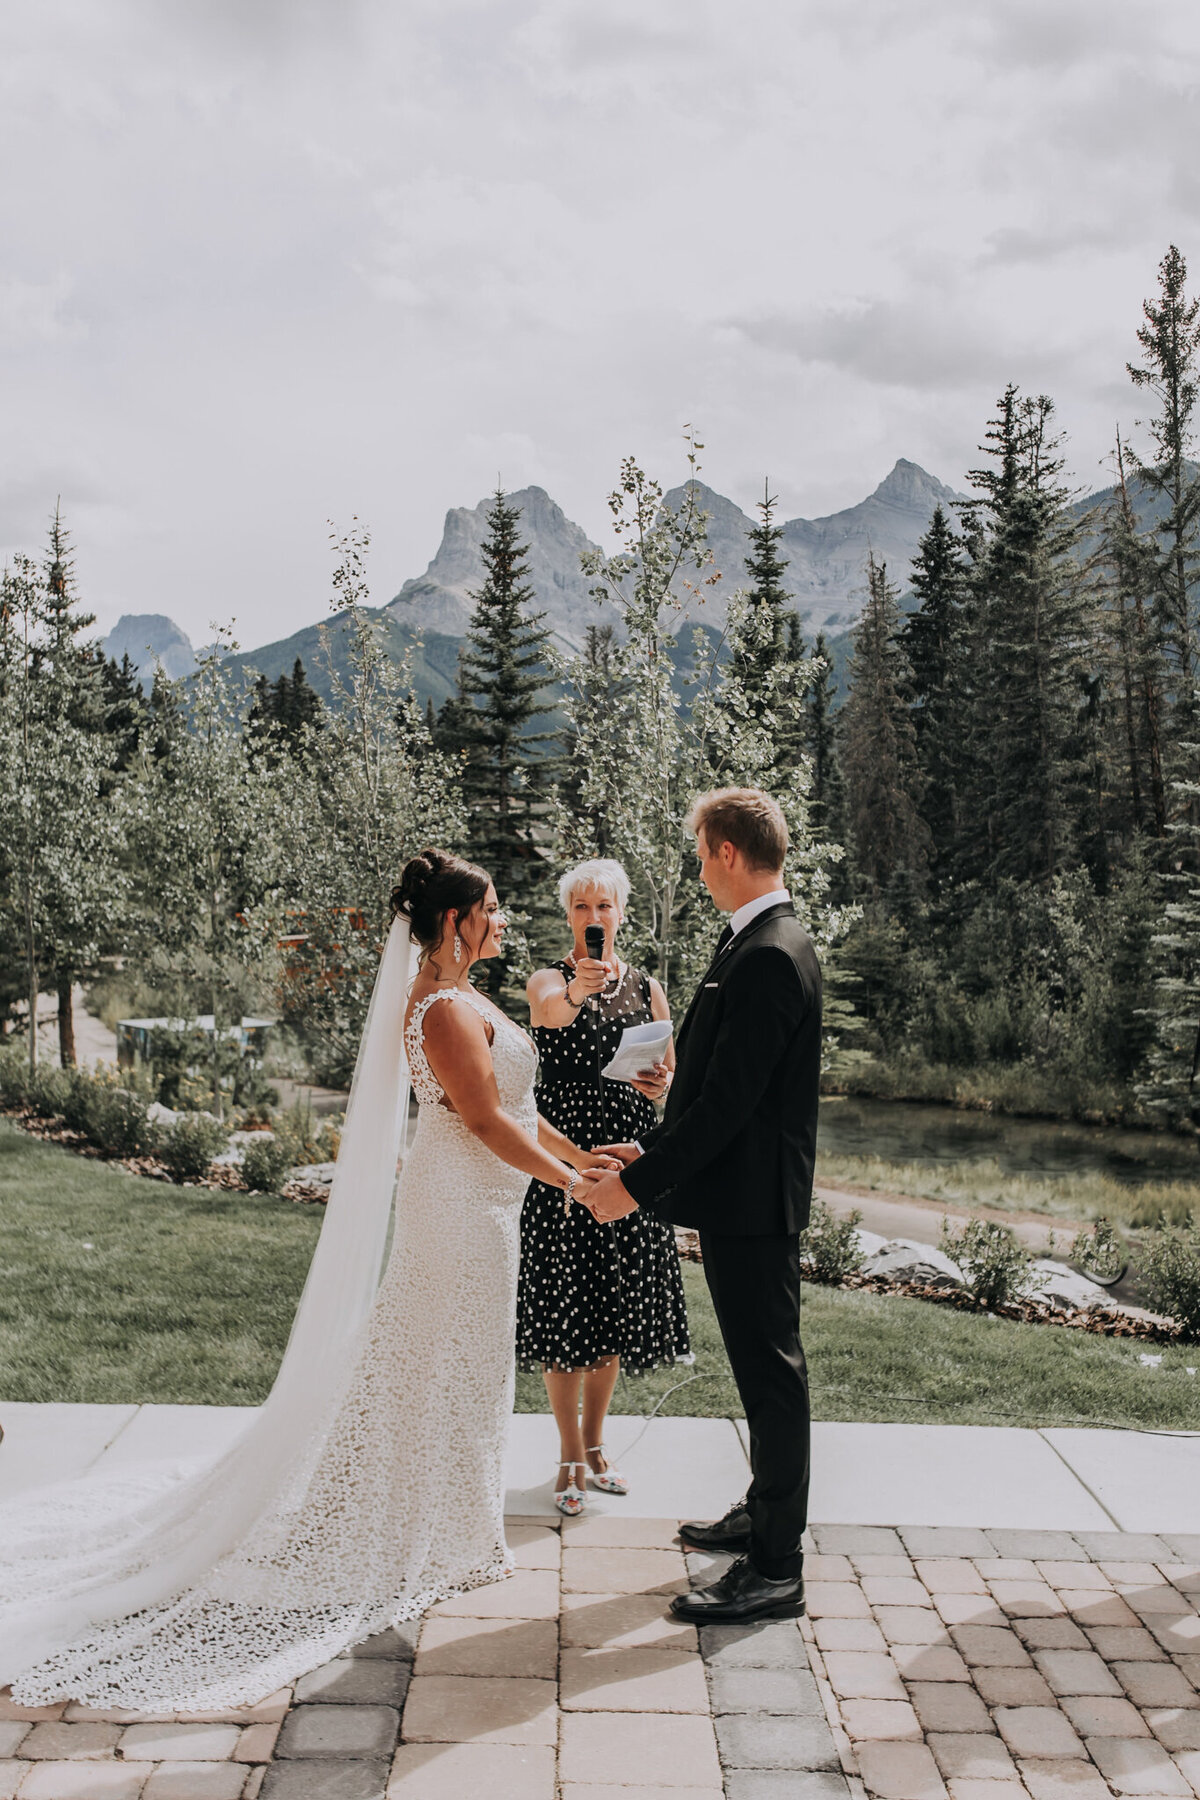 Beautiful outdoor wedding ceremony at The Malcolm Hotel, a modern romantic wedding venue in Canmore, featured on the Brontë Bride Vendor Guide.